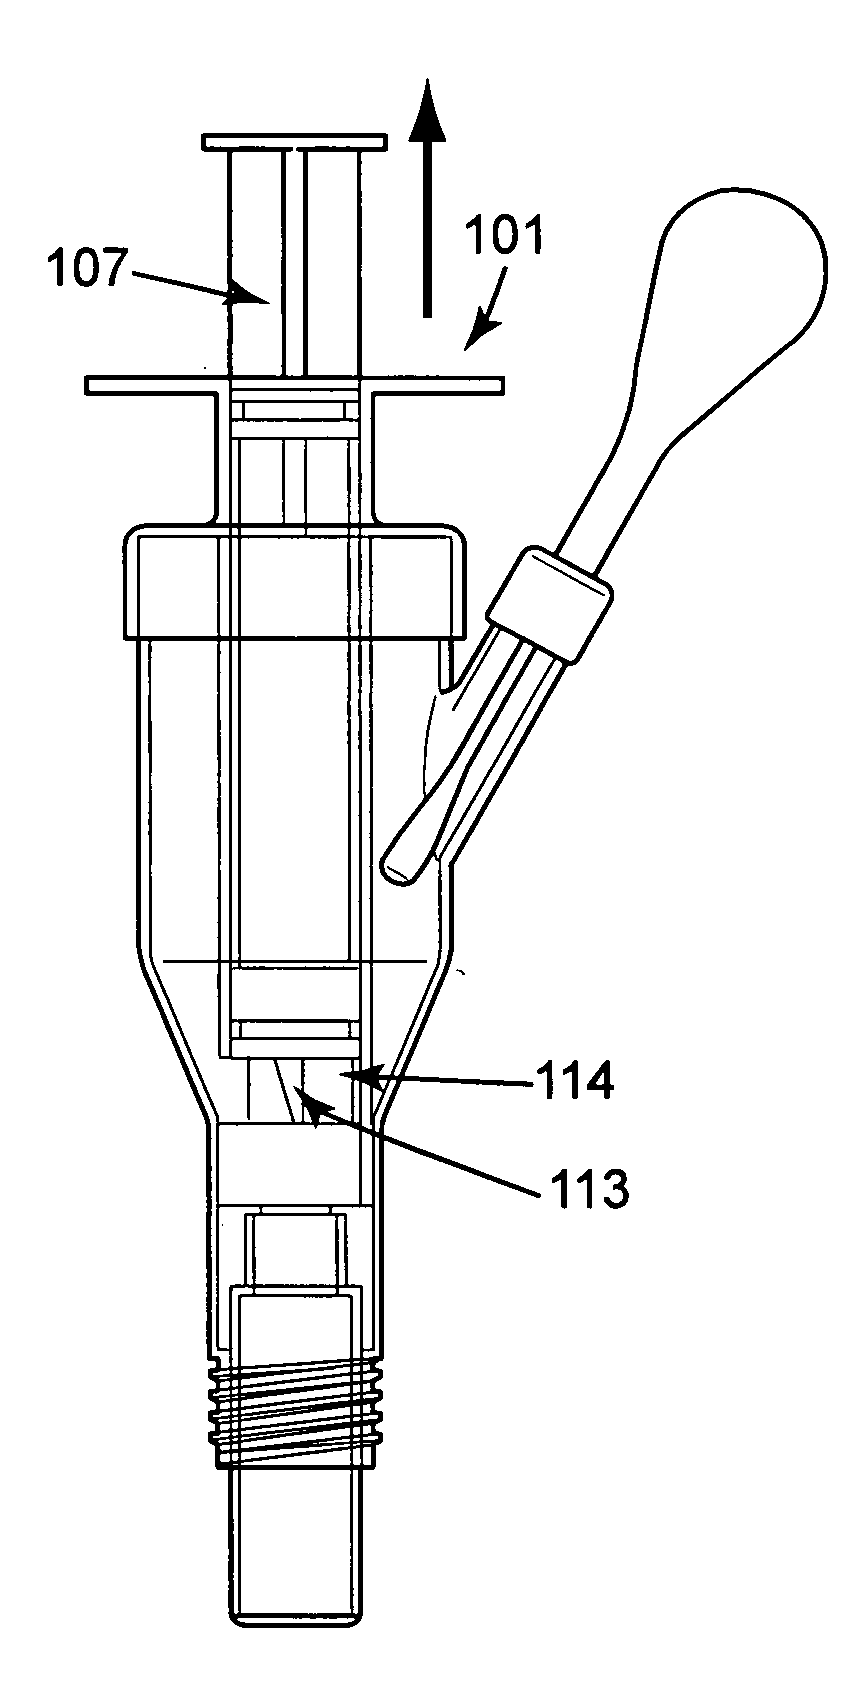 Substance identification apparatus and methods of using